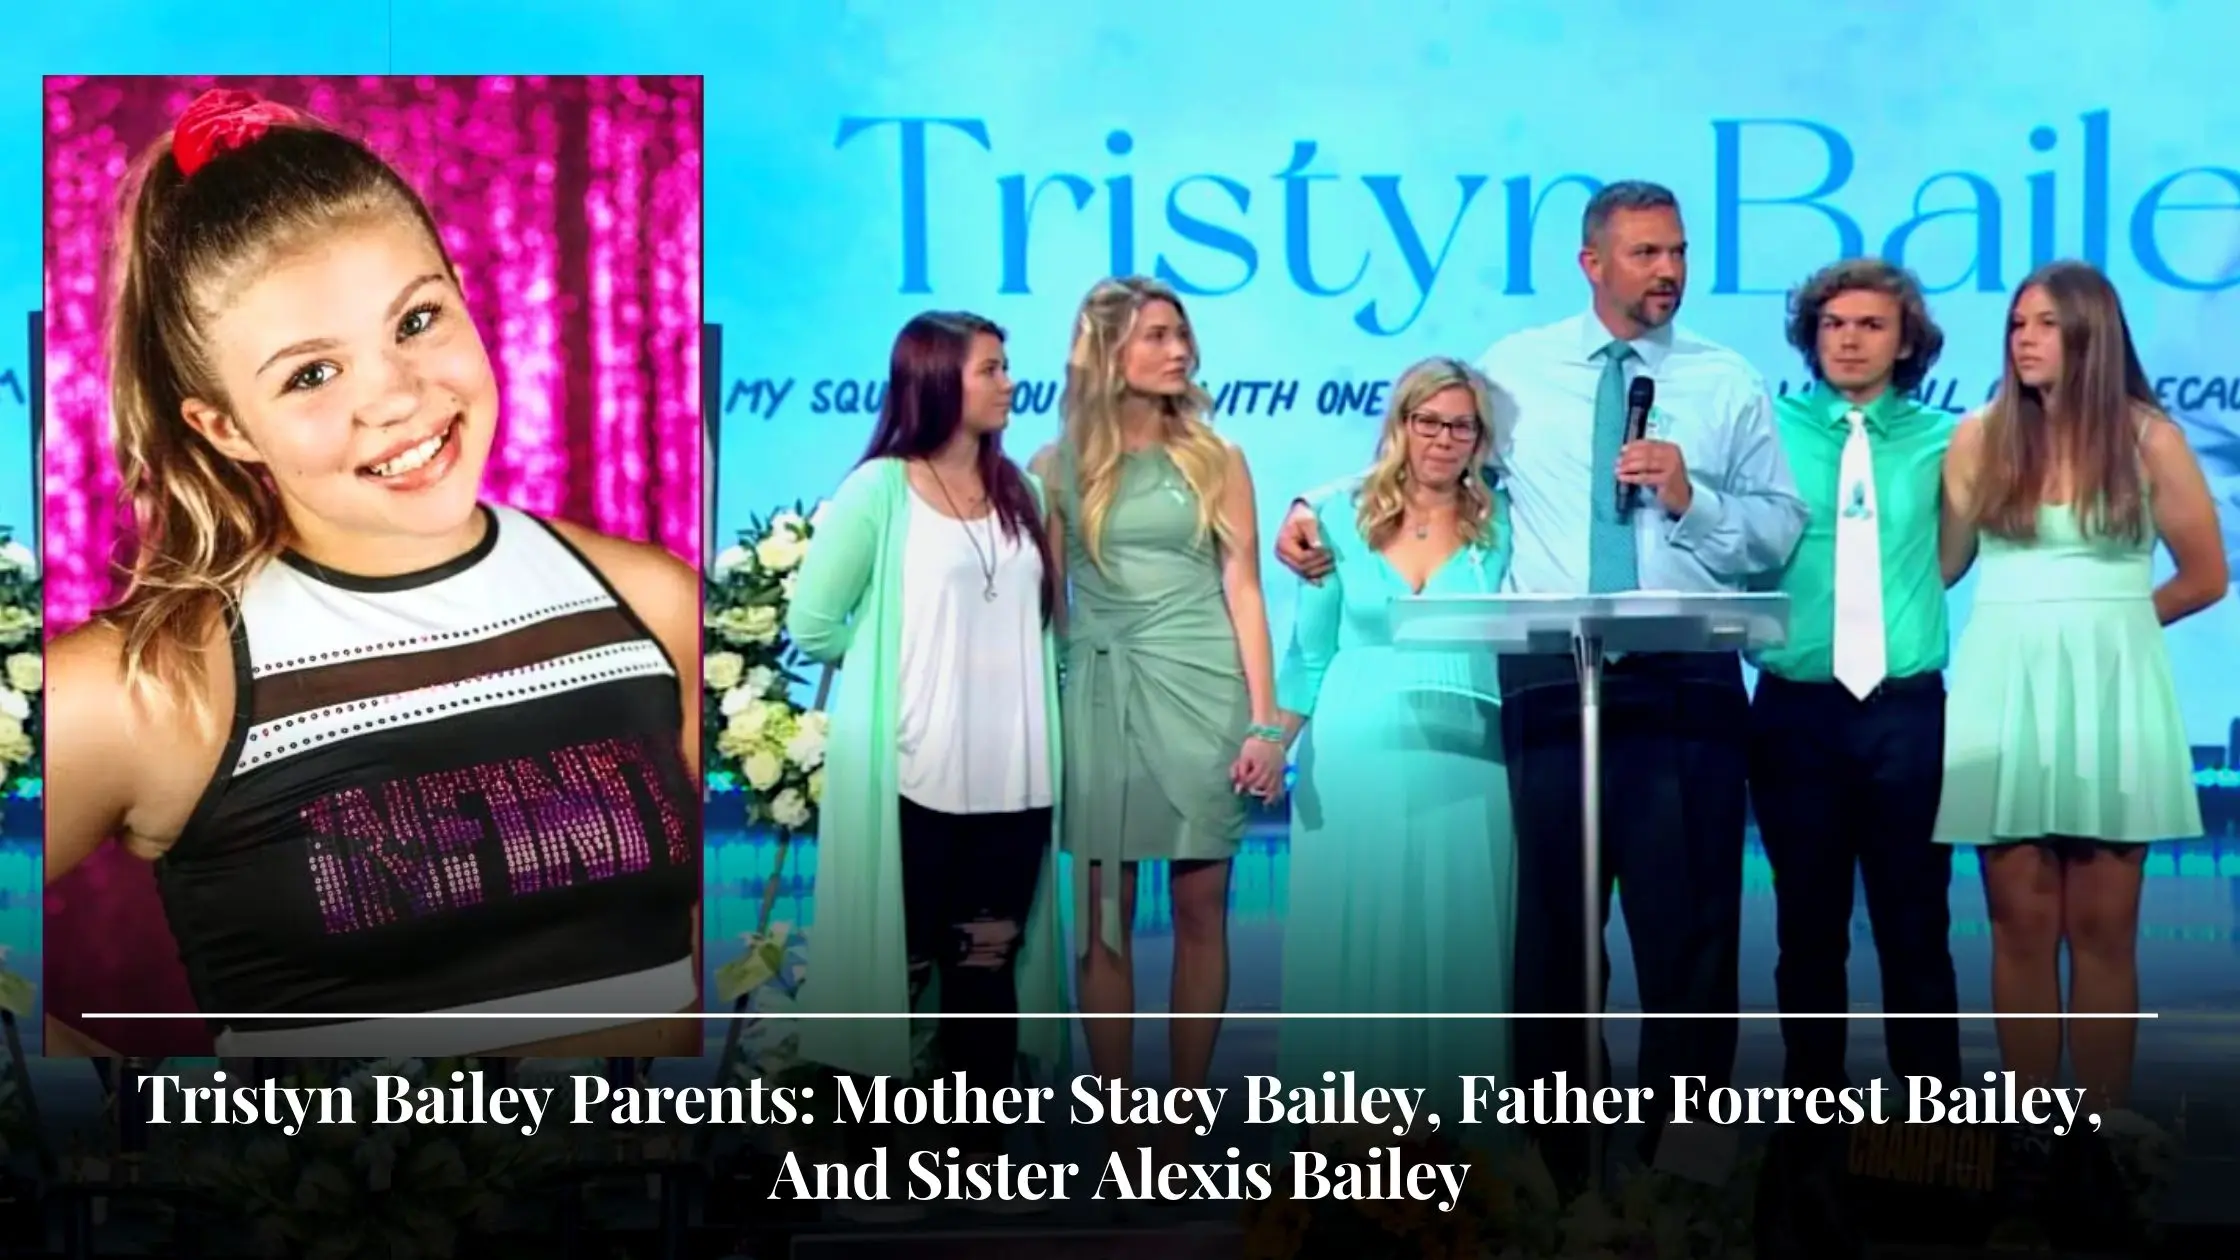 Tristyn Bailey Parents Mother Stacy Bailey, Father Forrest Bailey, And Sister Alexis Bailey